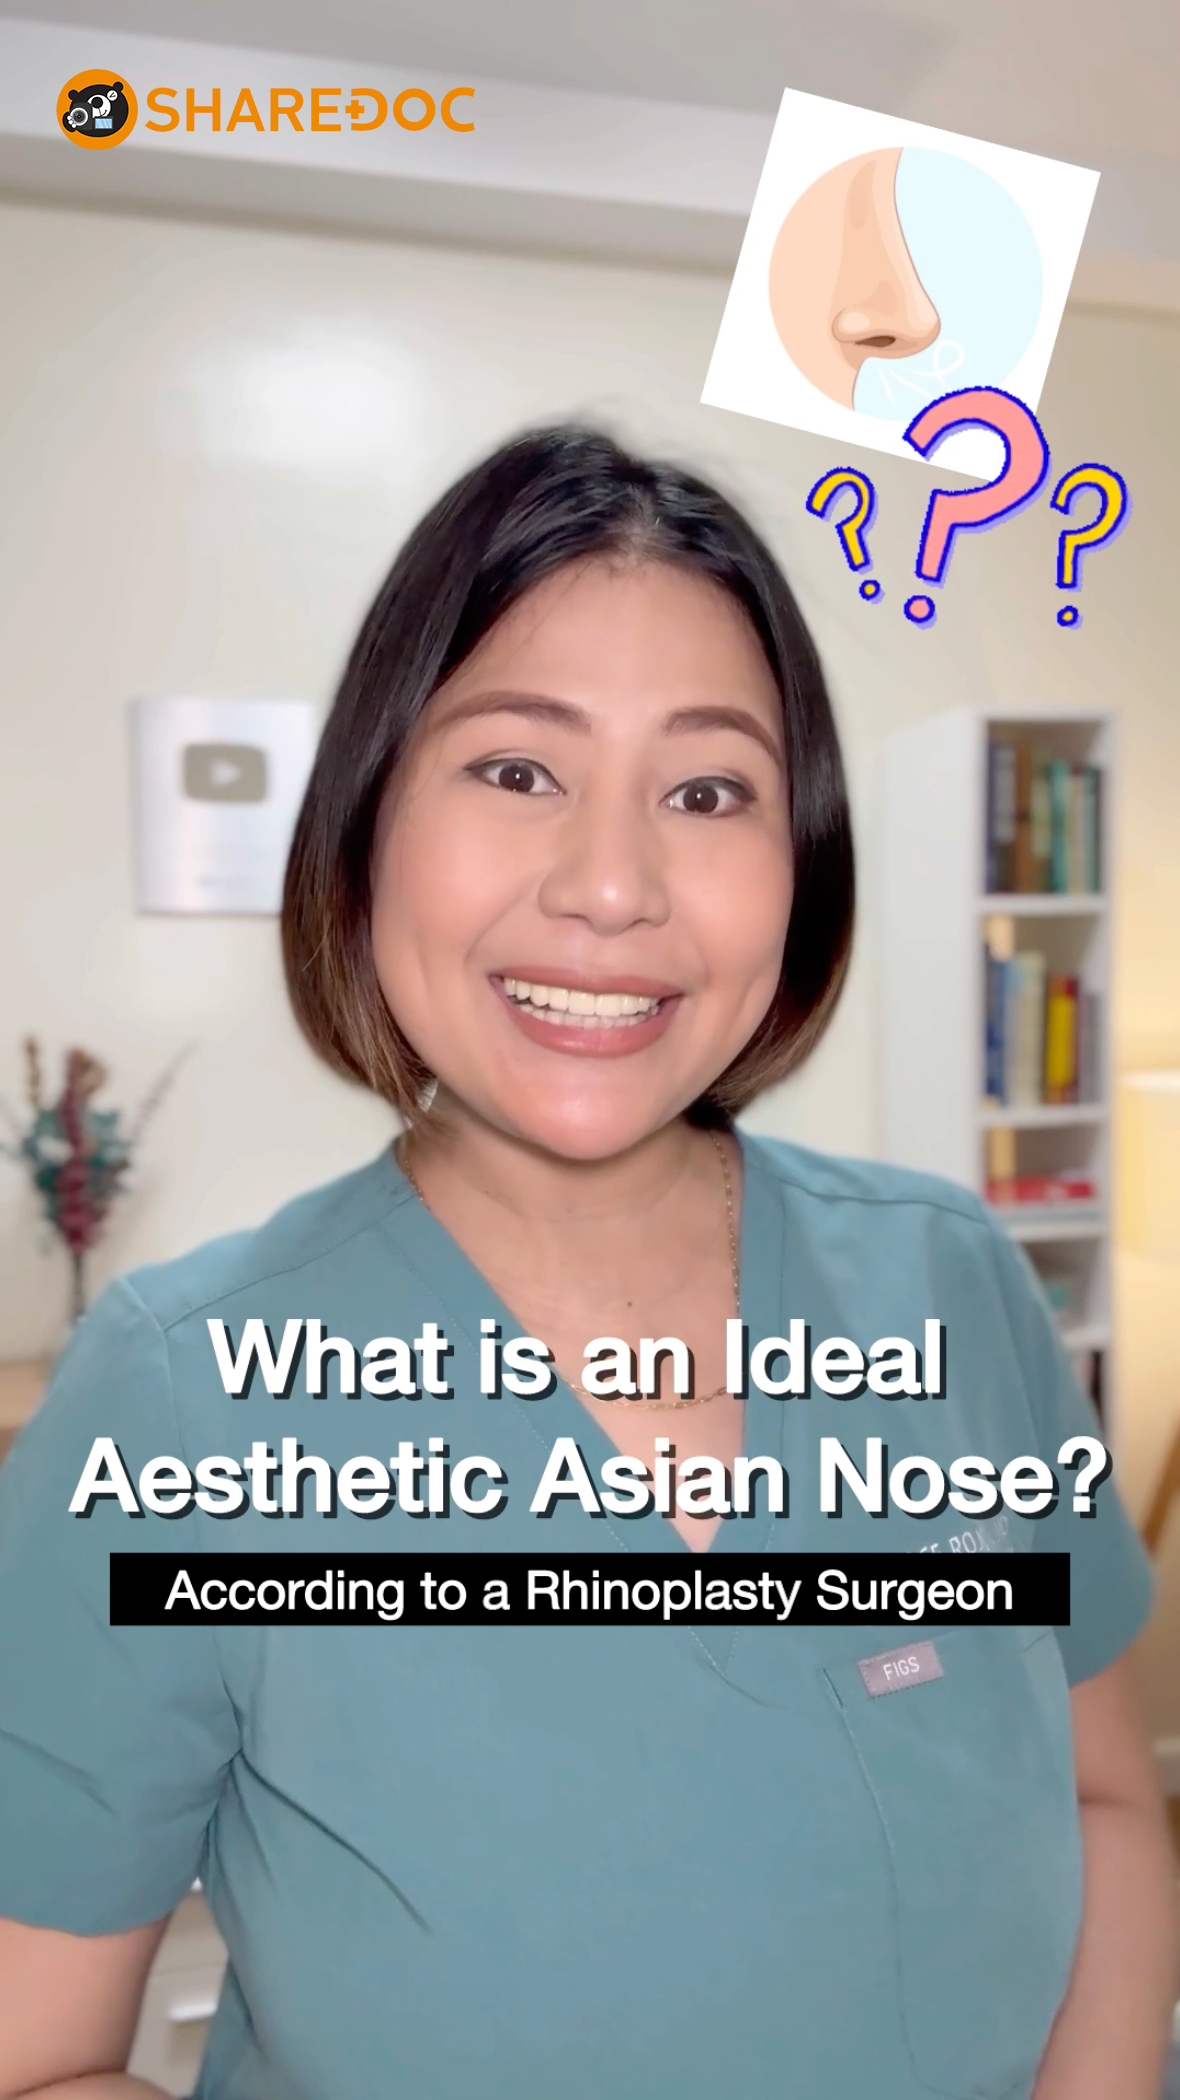 What is an Ideal Aesthetic Asian Nose